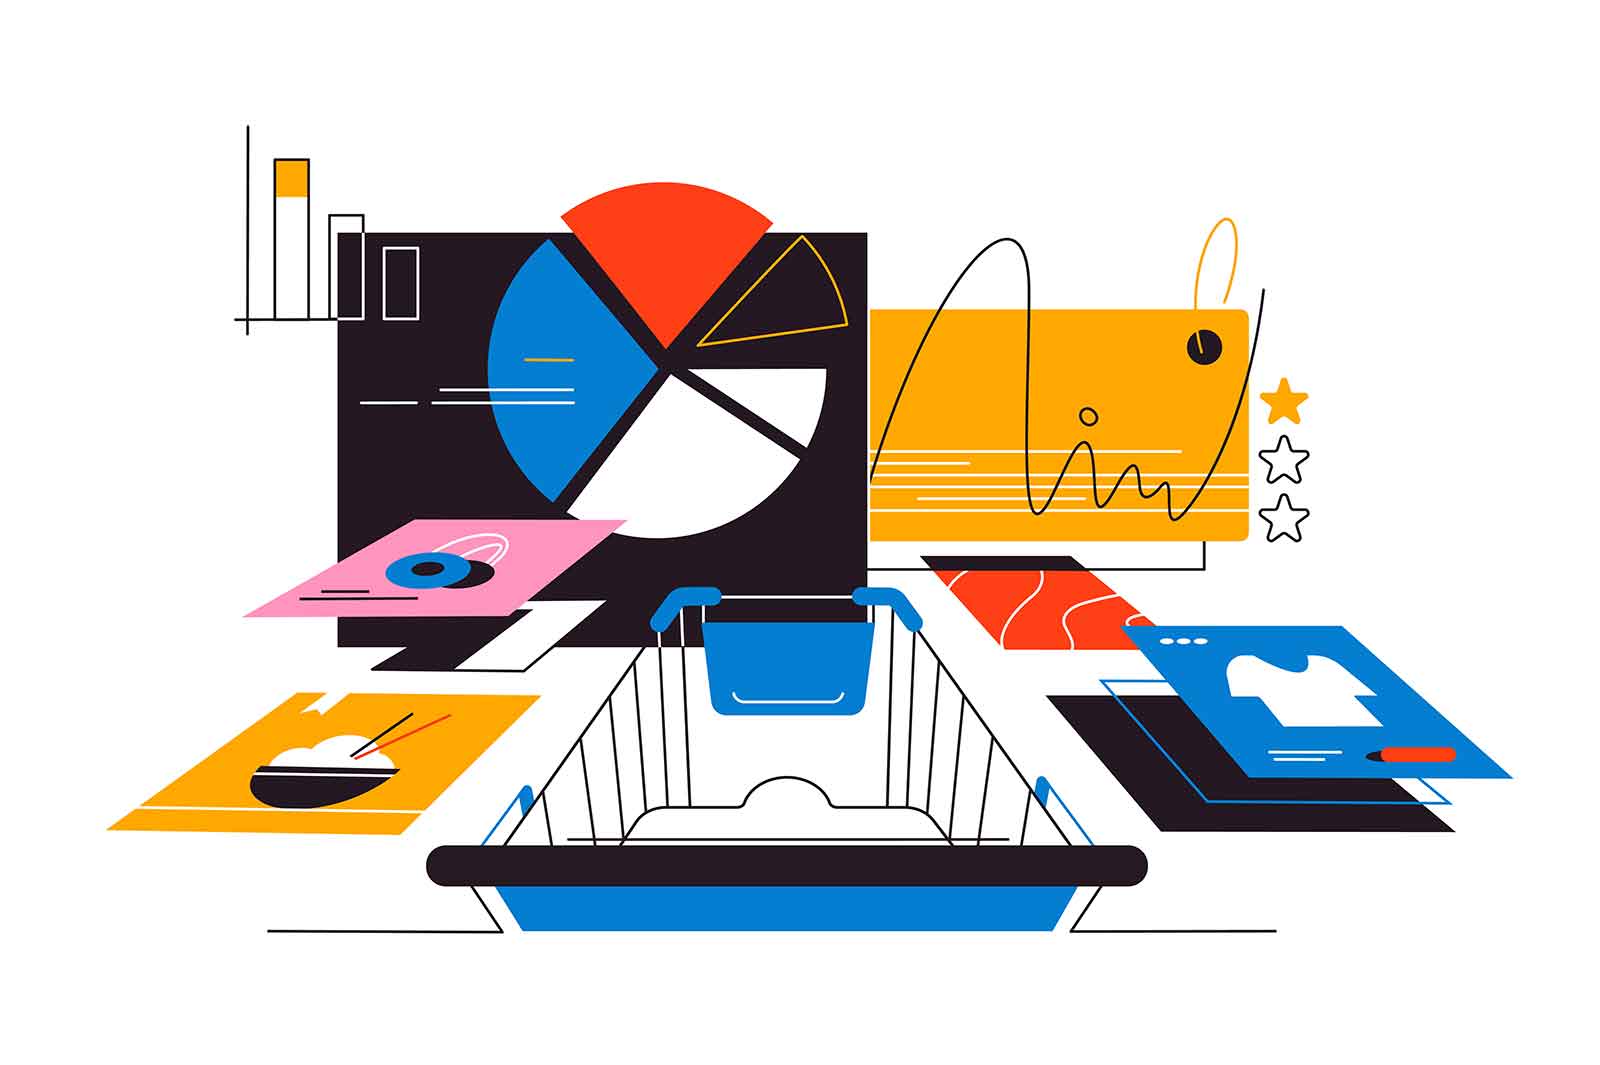 Shopping cart products and data analysis vector illustration. Retail market research concept.